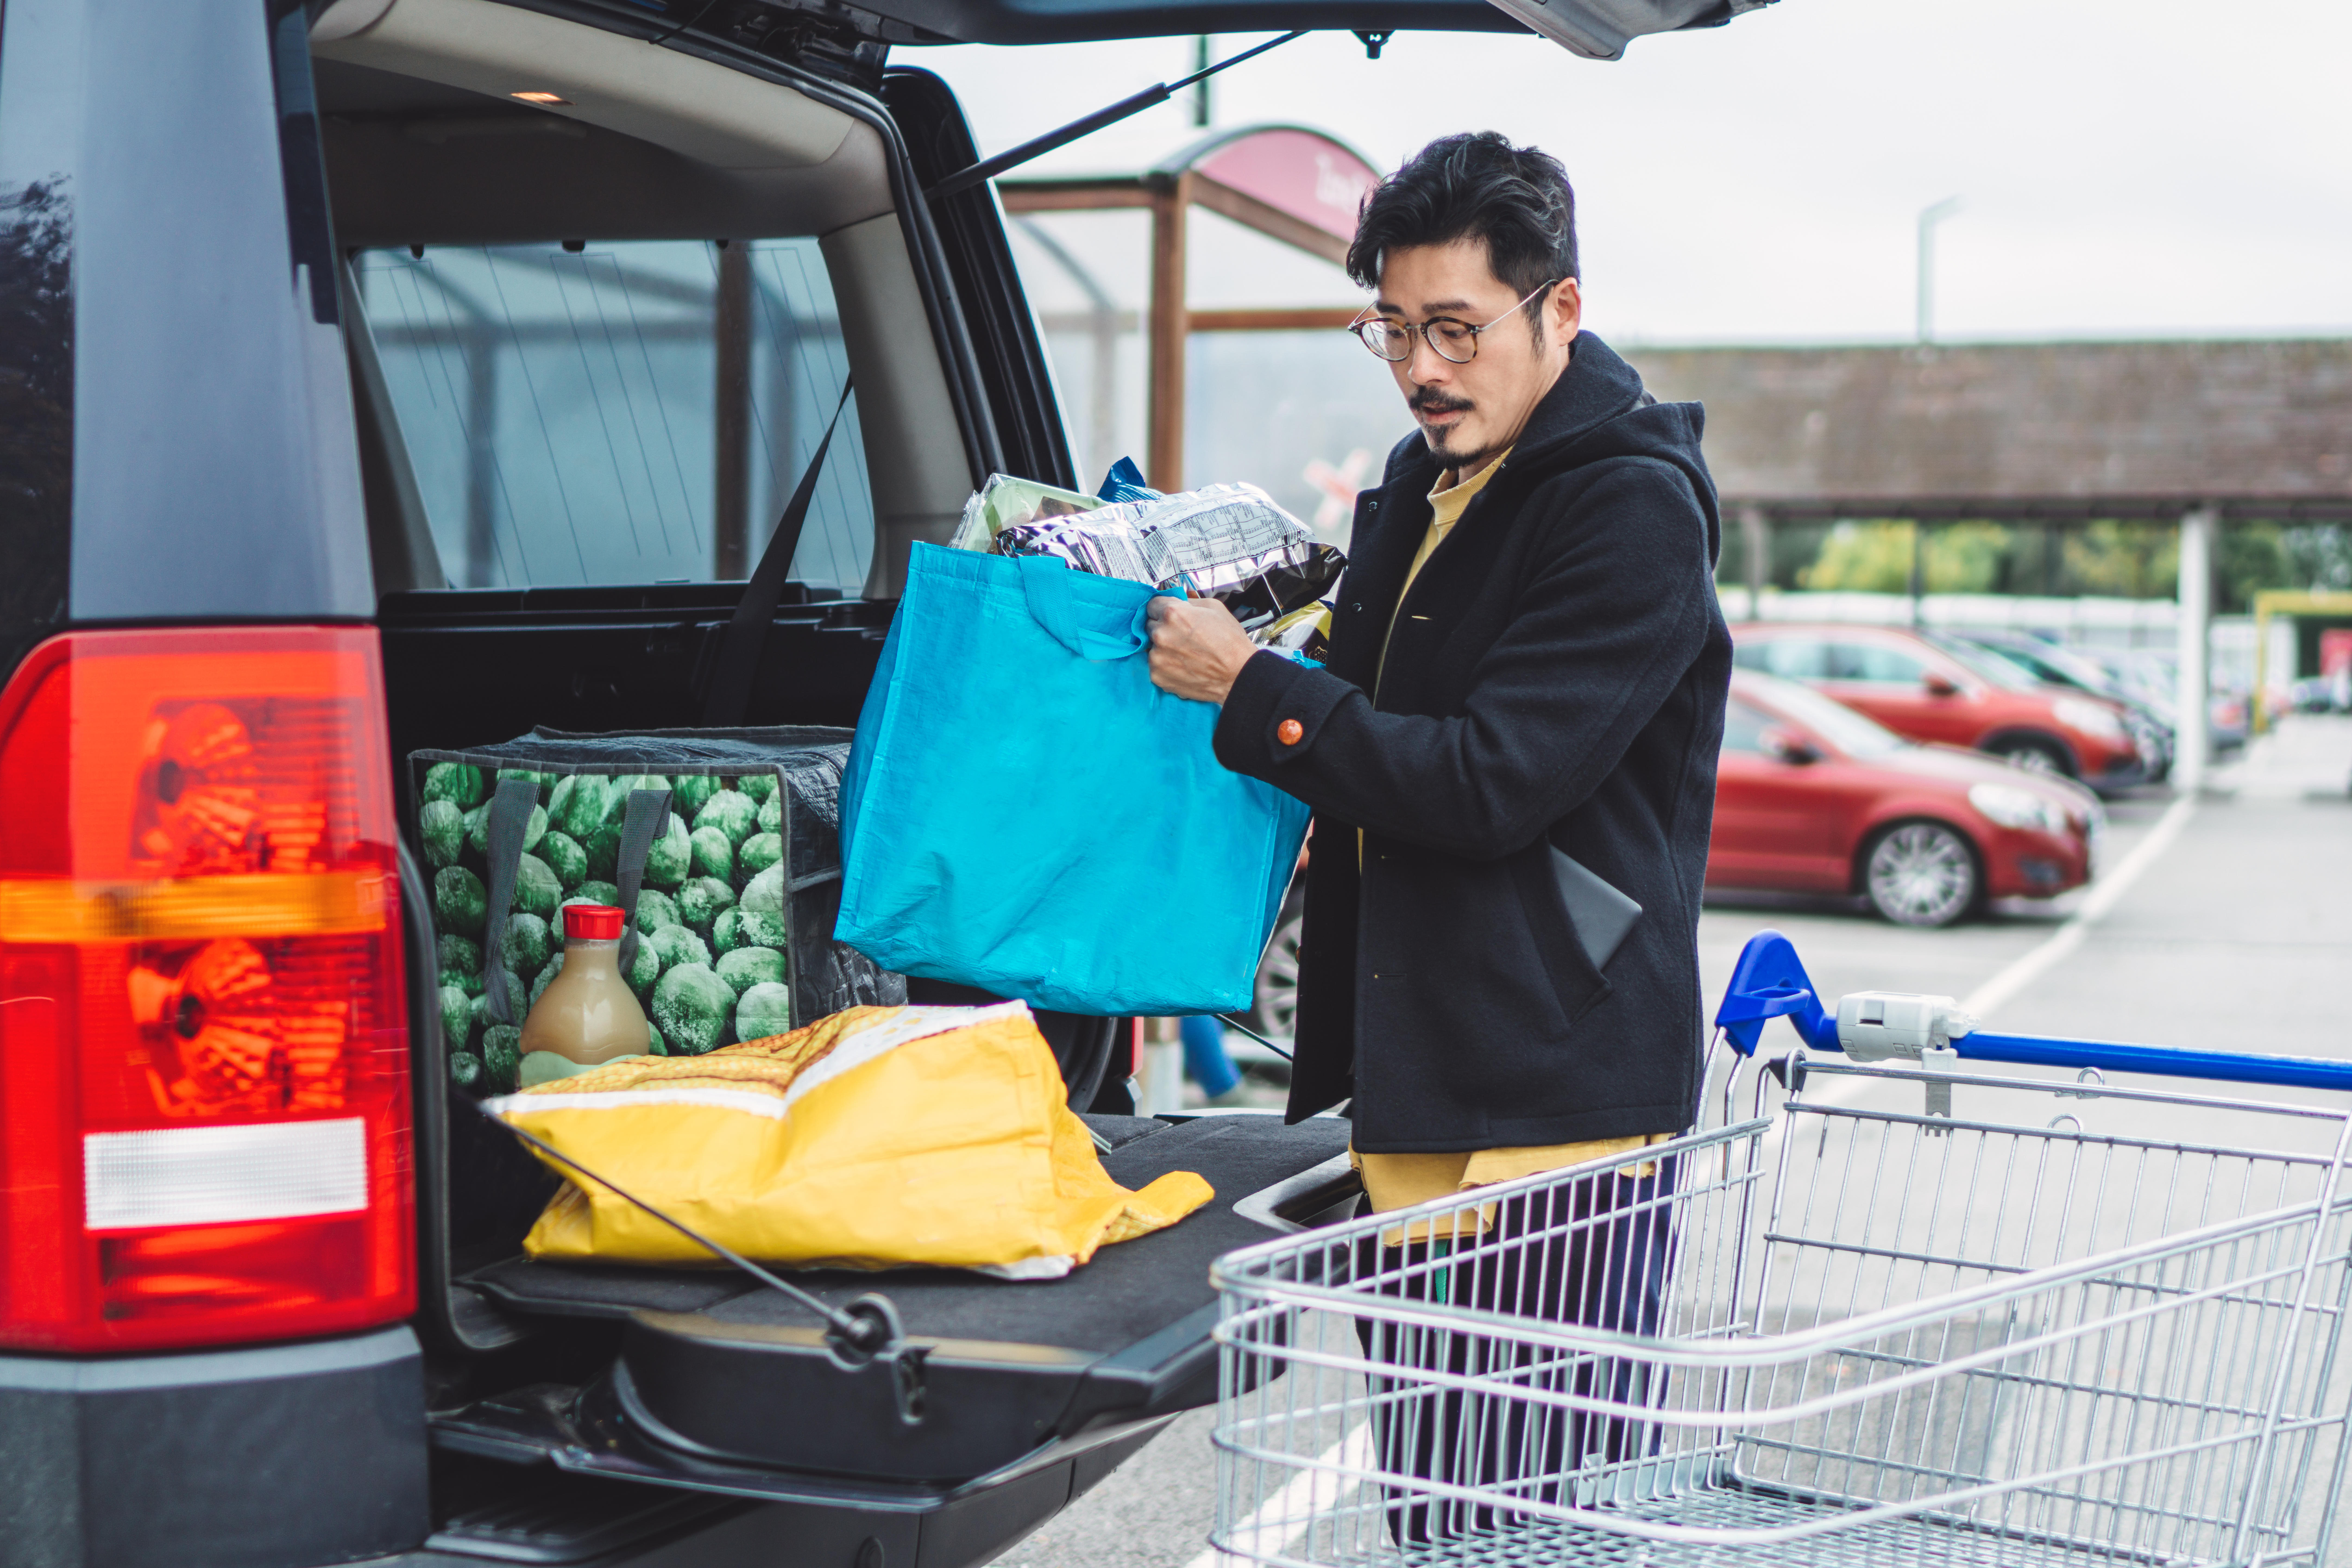 Young man putting away bags of groceries in his car trunk at supermarket car park 